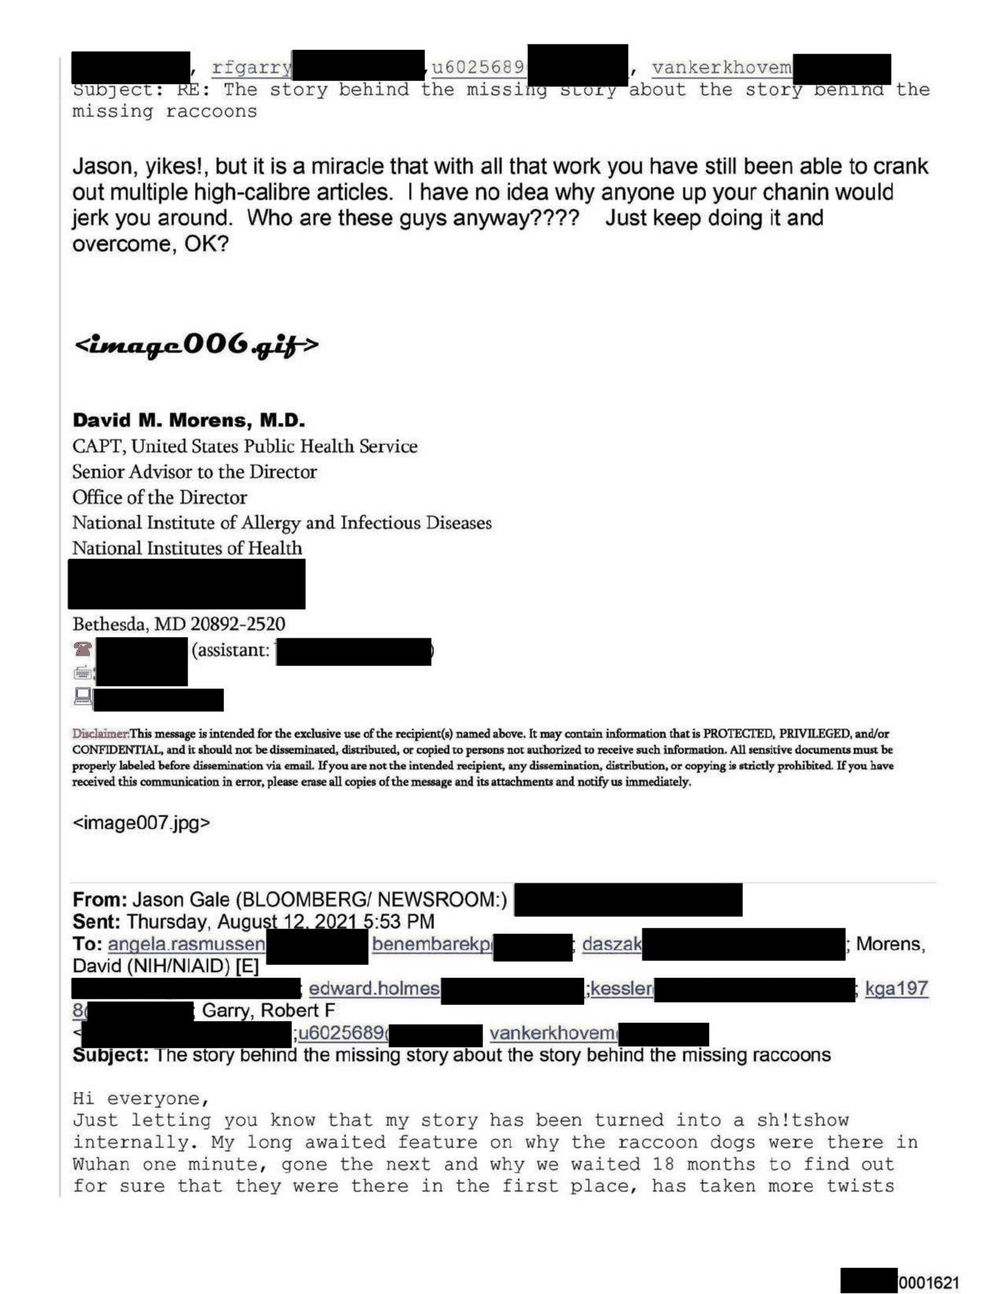 Page 39 from David Morens NIH Emails Redacted